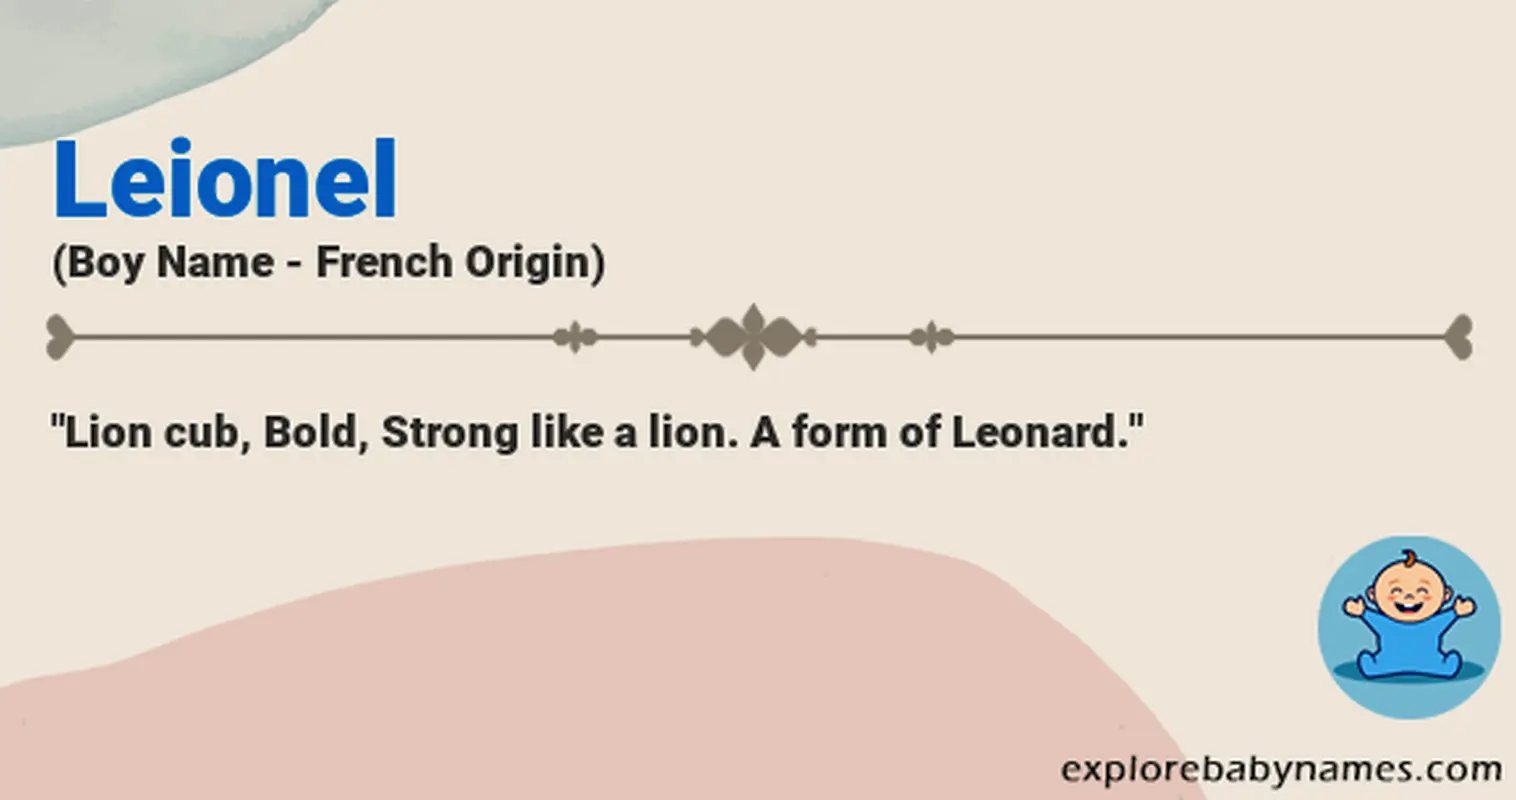 Meaning of Leionel